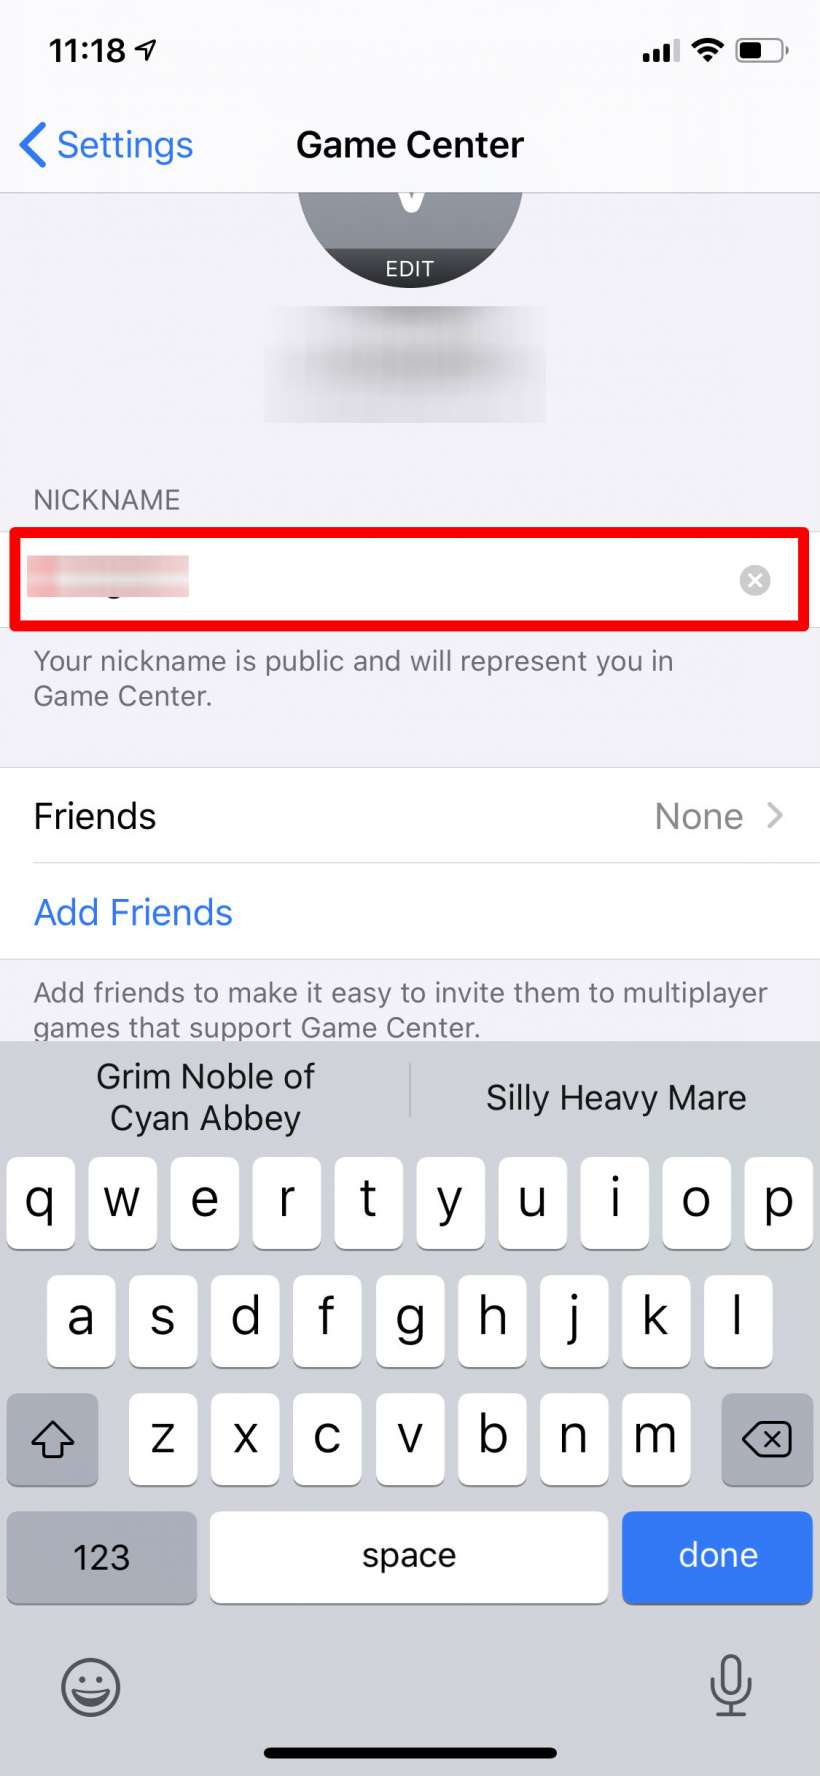 How to change your nickname in Game Center on iPhone and iPad.